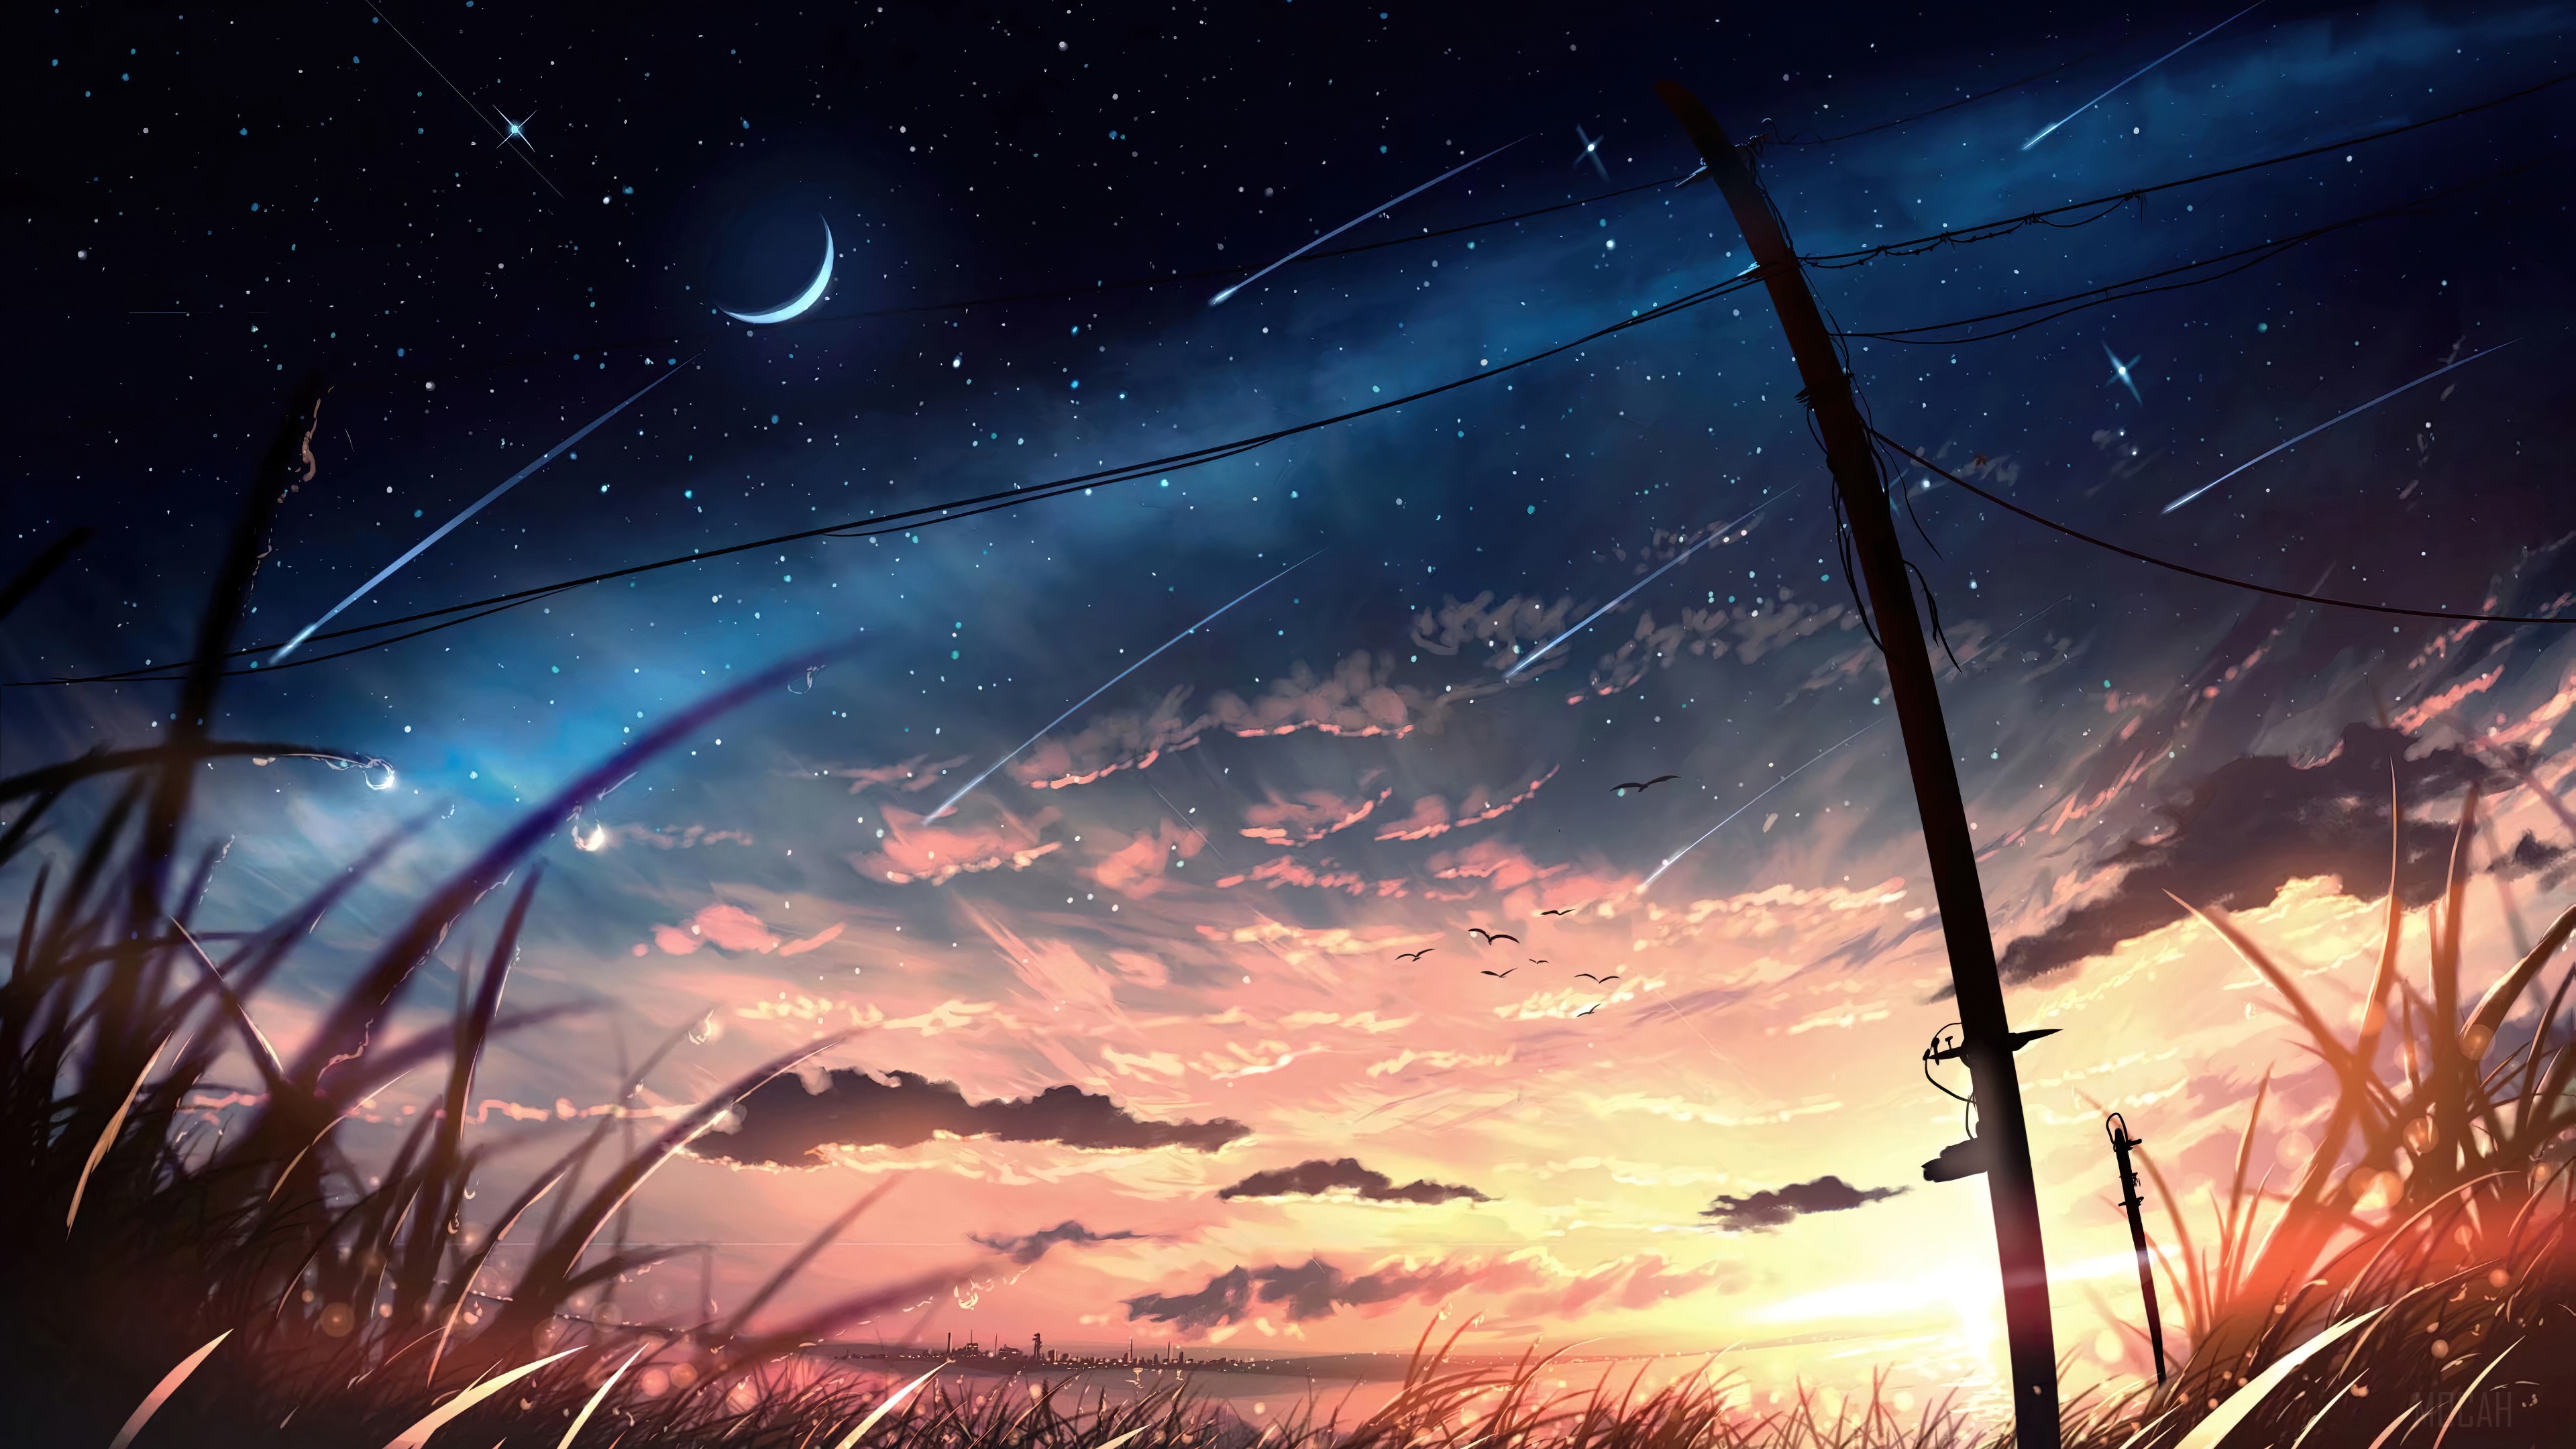 Starry Sky Anime World iPhone Wallpaper - iPhone Wallpapers